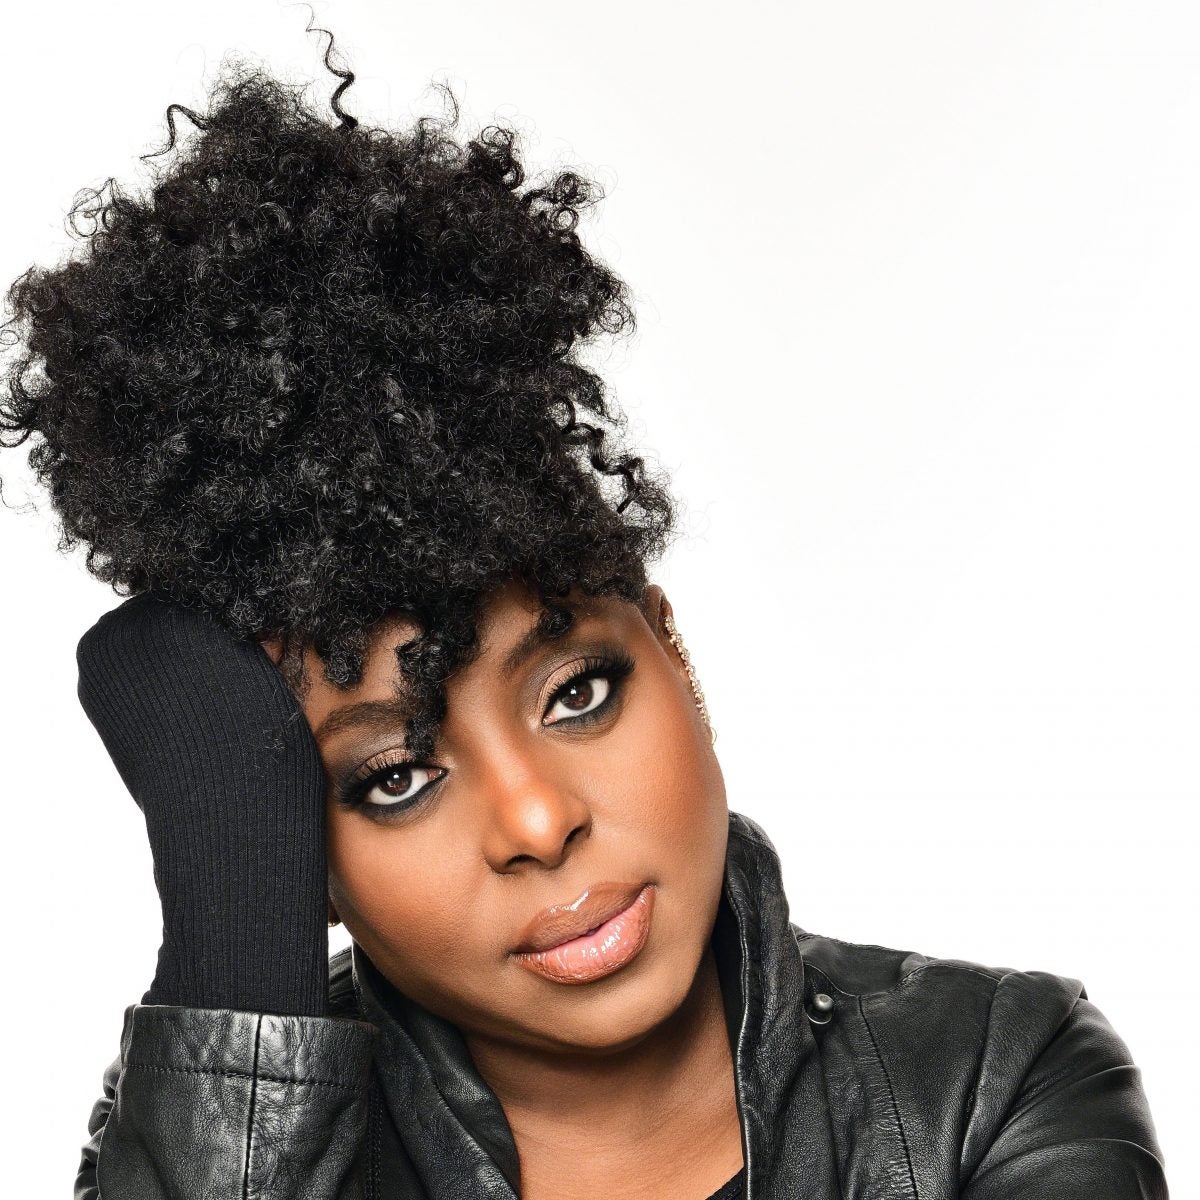 Ledisi Drops Video for New Single 'Anything For You'